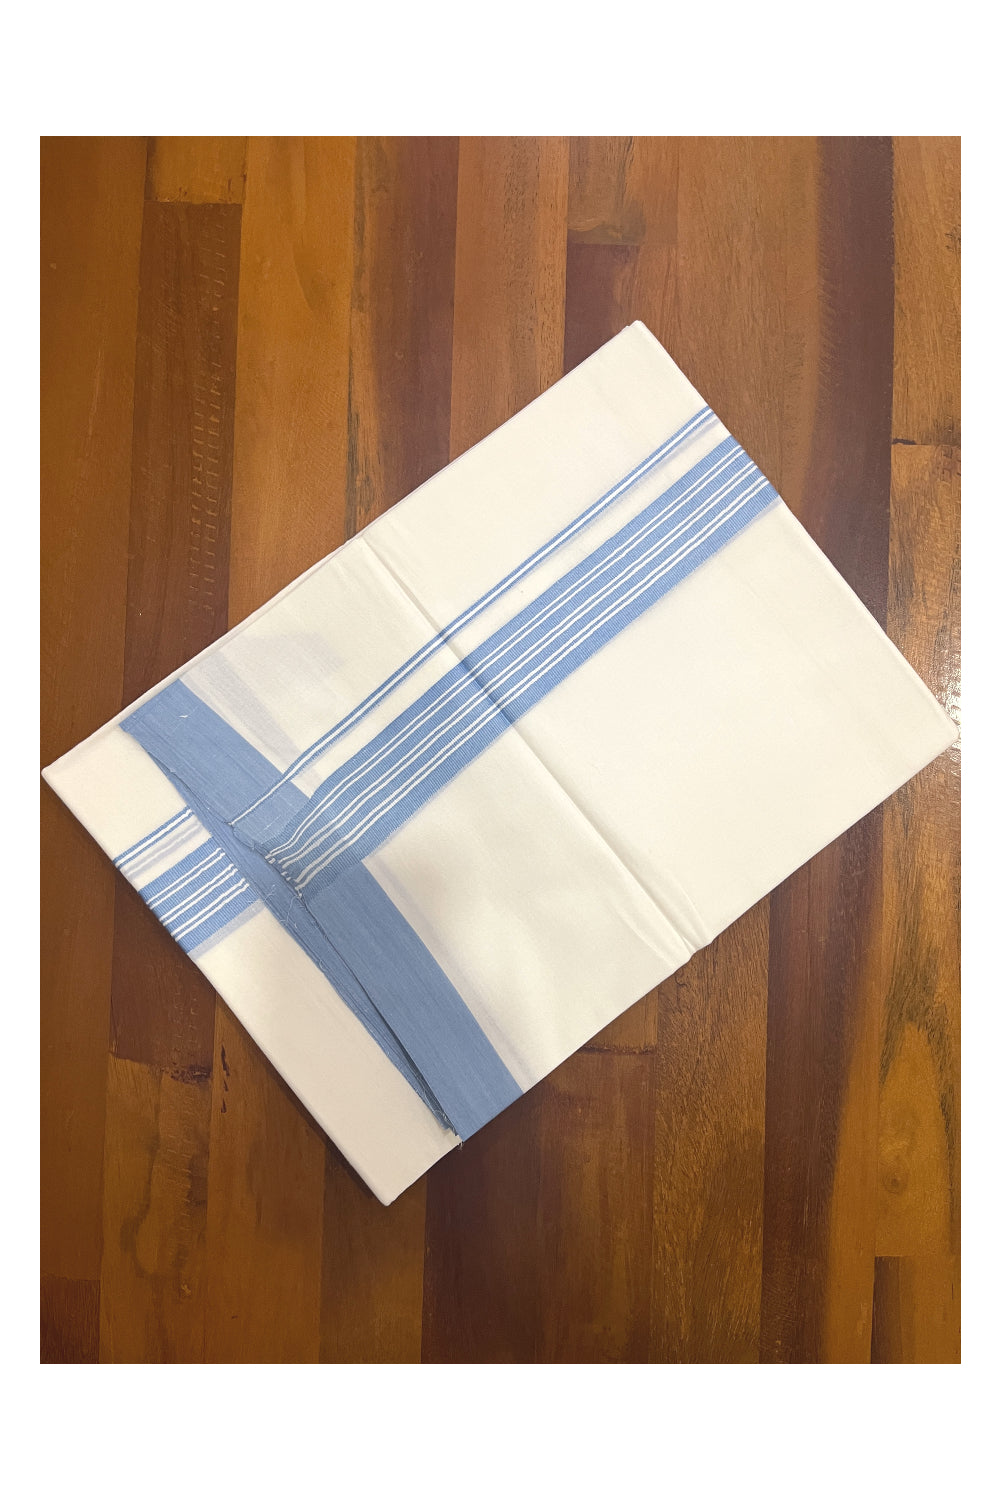 Pure White Cotton Double Mundu with Blue Lines Border (South Indian Kerala Dhoti)